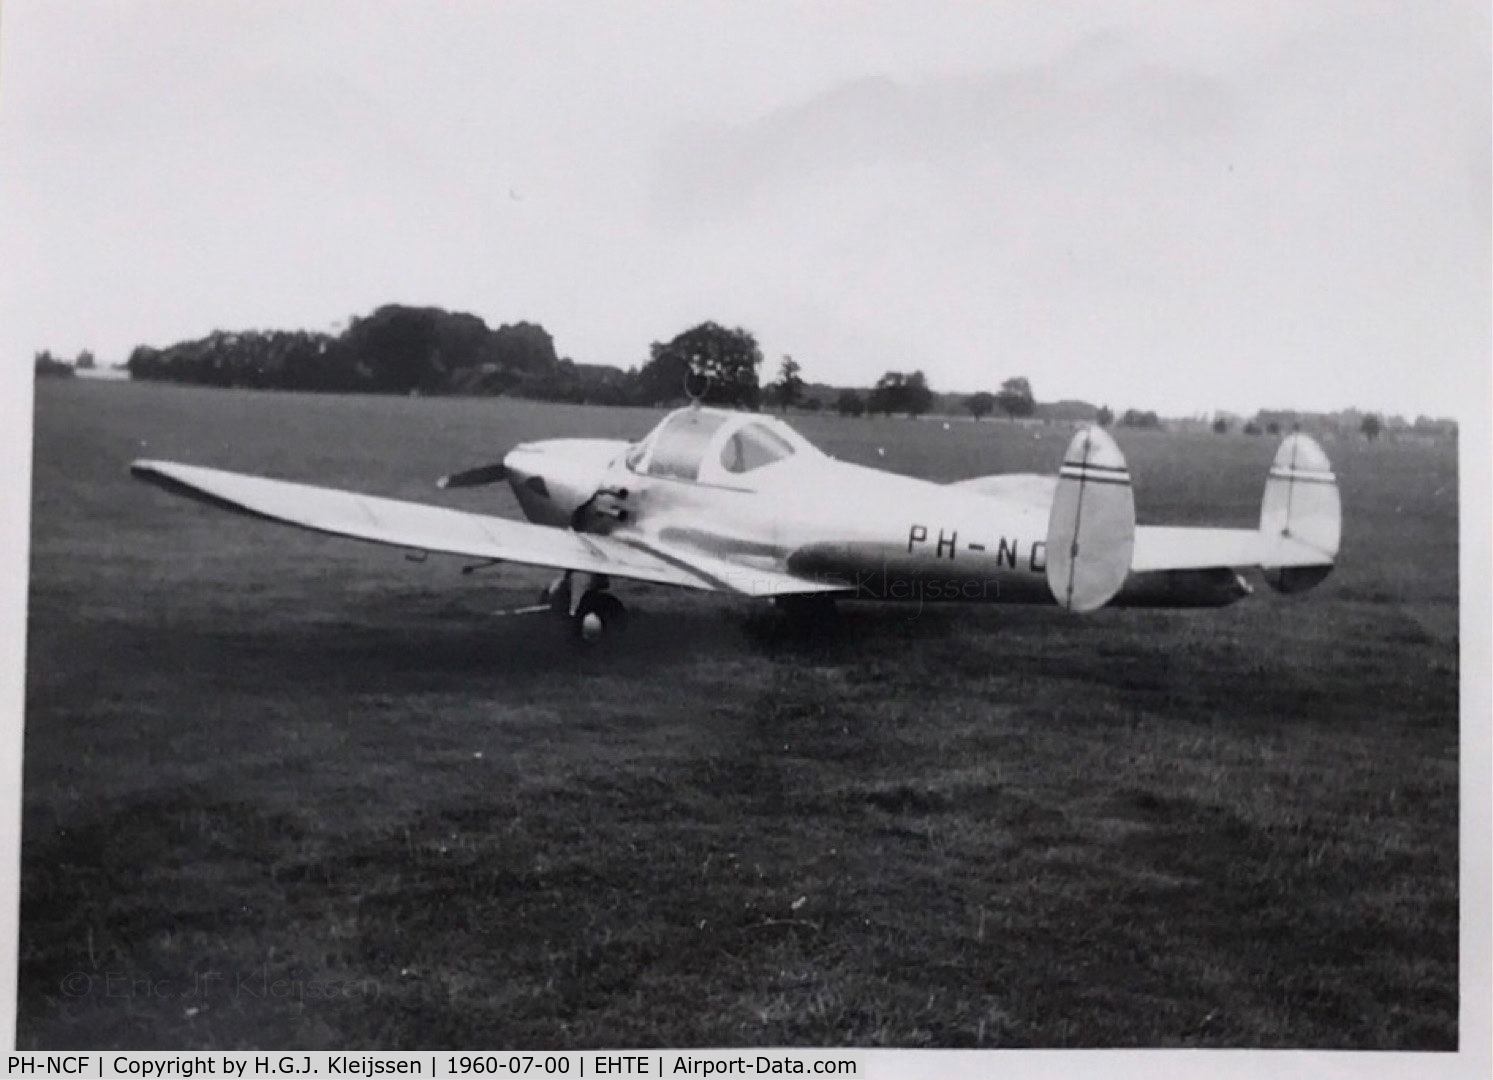 PH-NCF, 1947 Erco 415C Ercoupe C/N 4754, 1960 July (exact day unknown) Airport Teuge